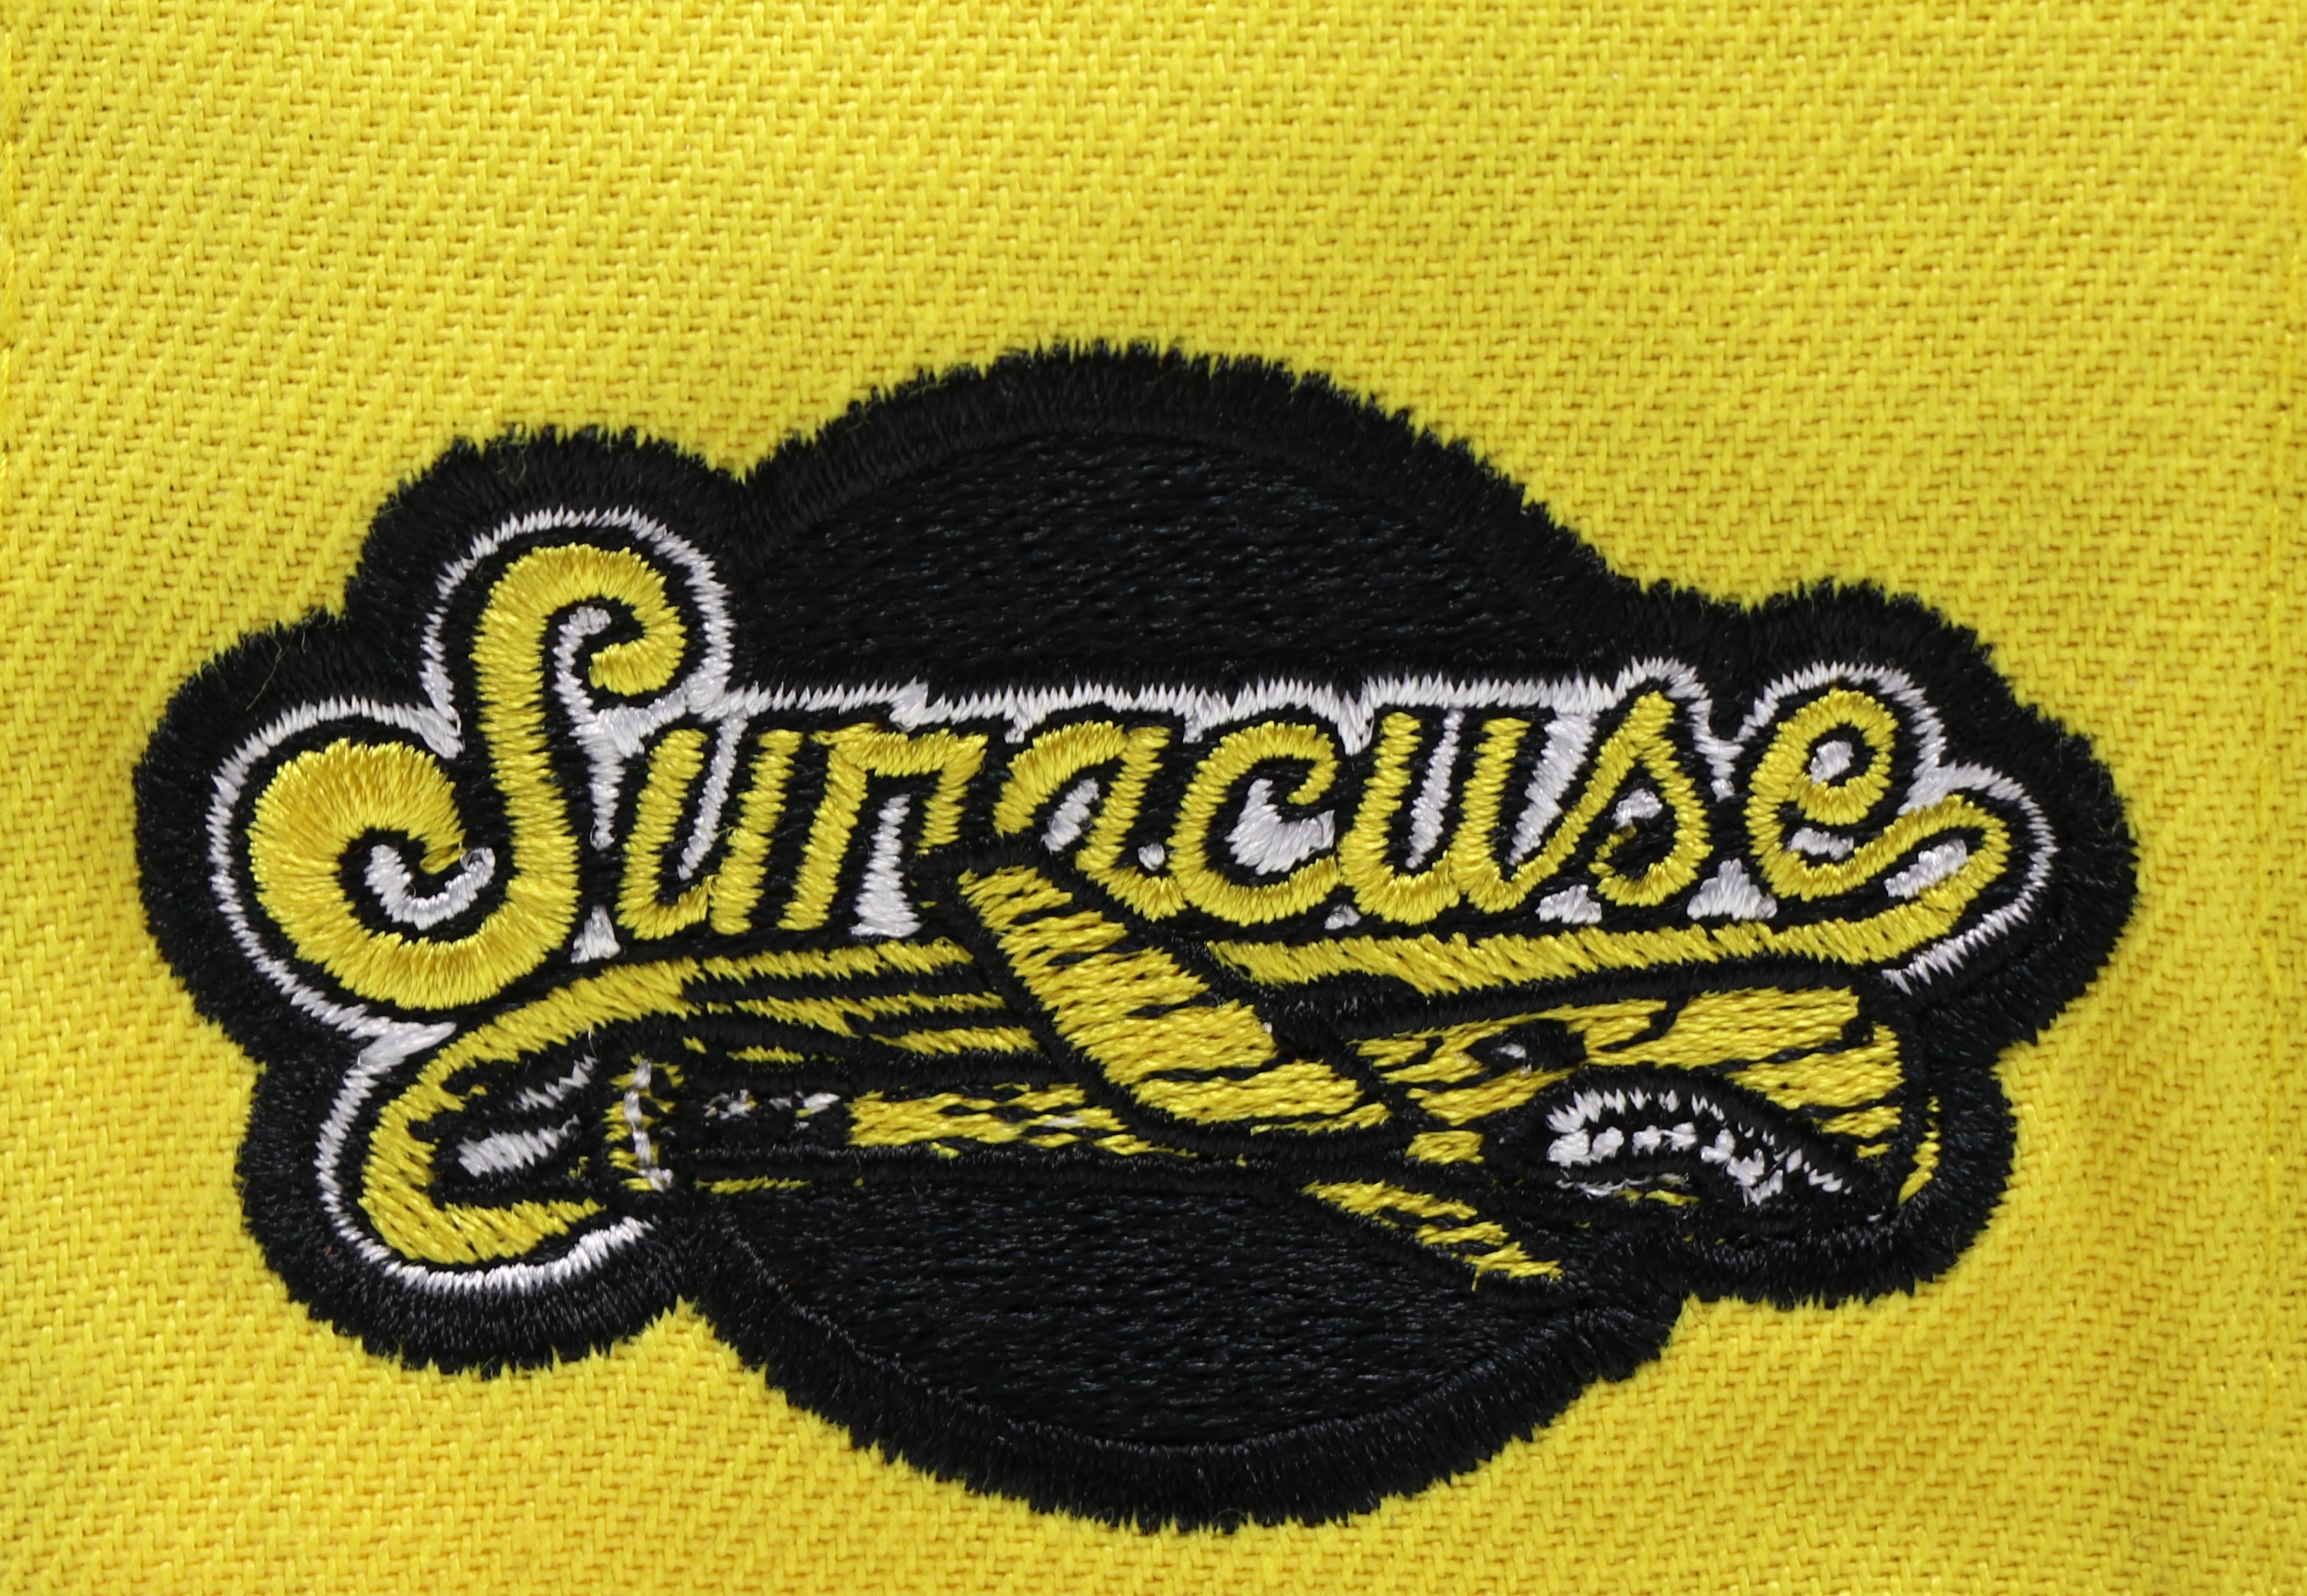 SYRACUSE SKYCHIEFS (YELLOW) NEW ERA 59FIFTY FITTED